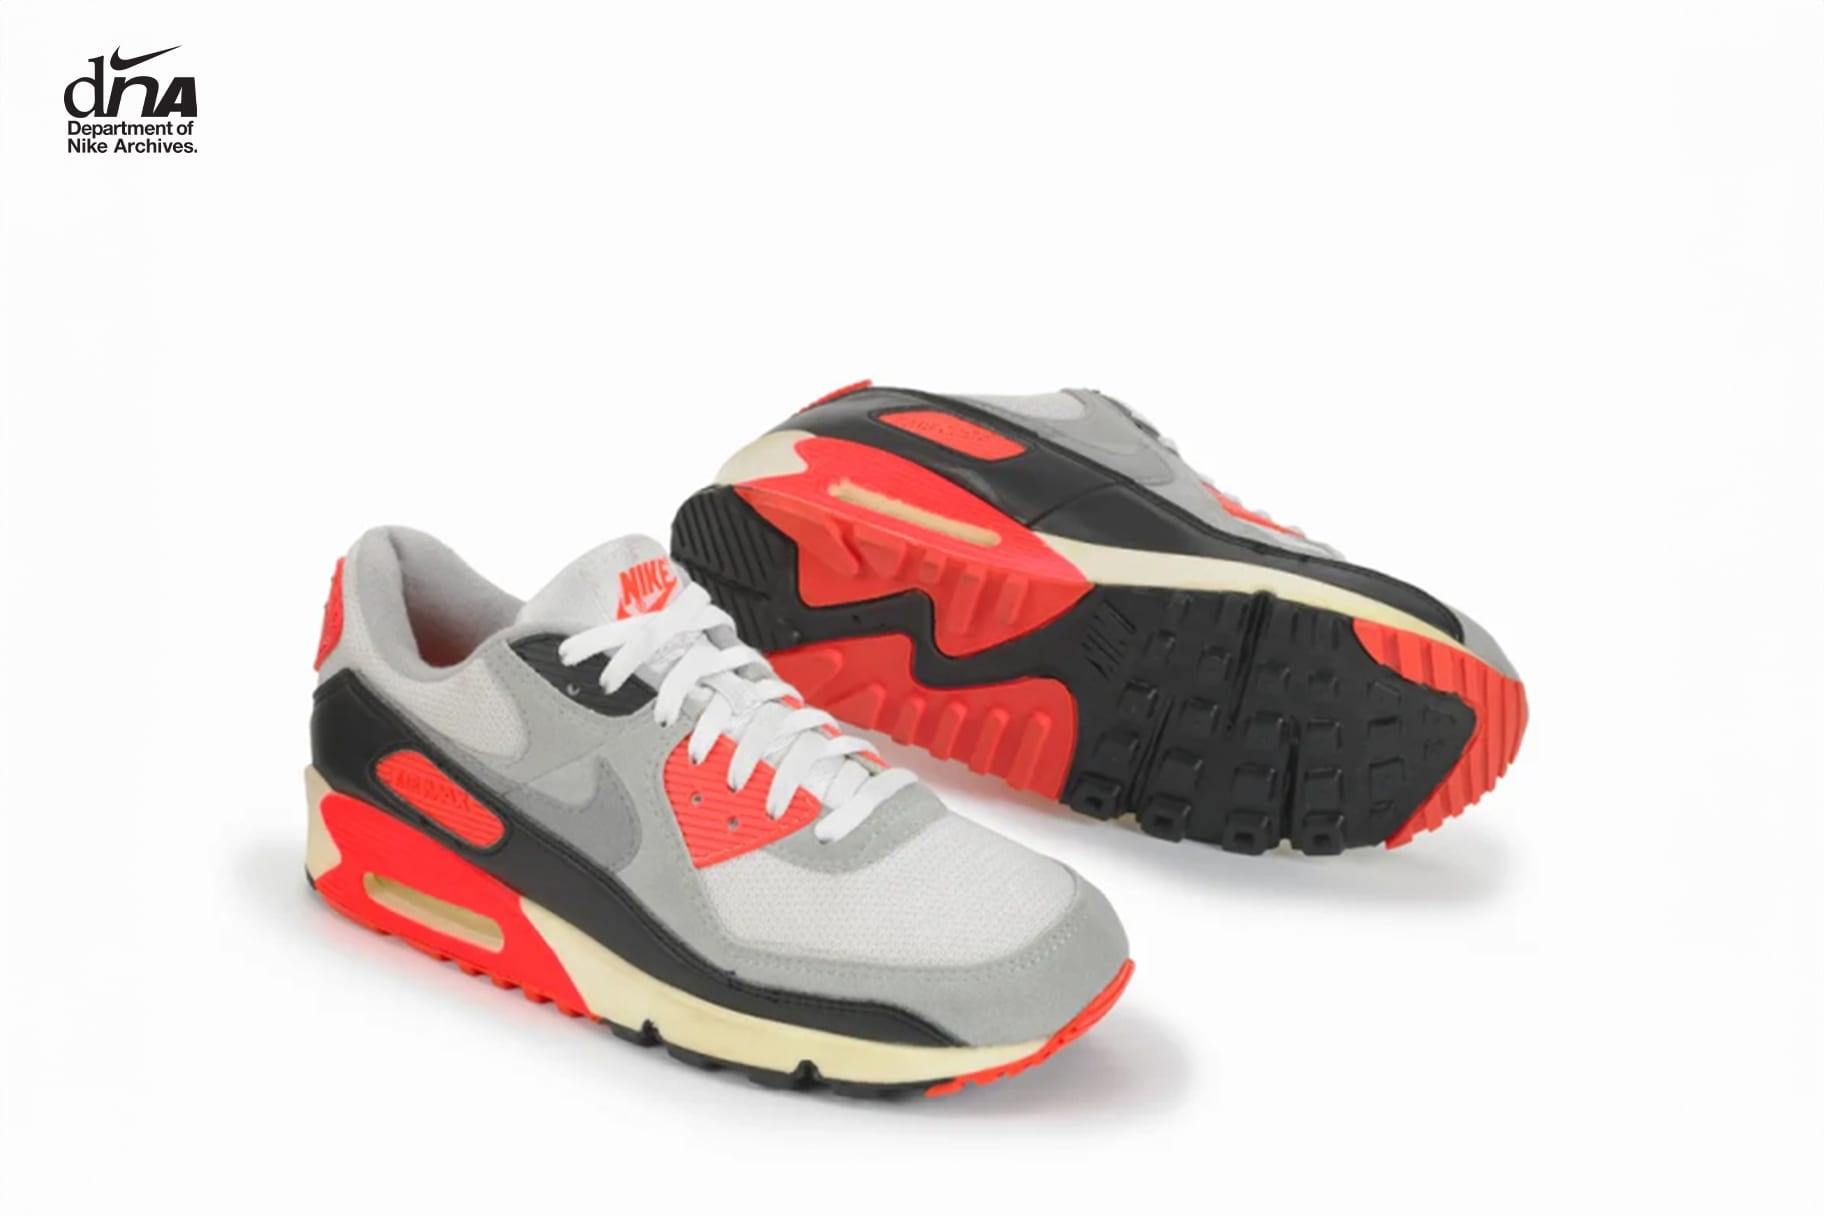 The History of the Air Max 90